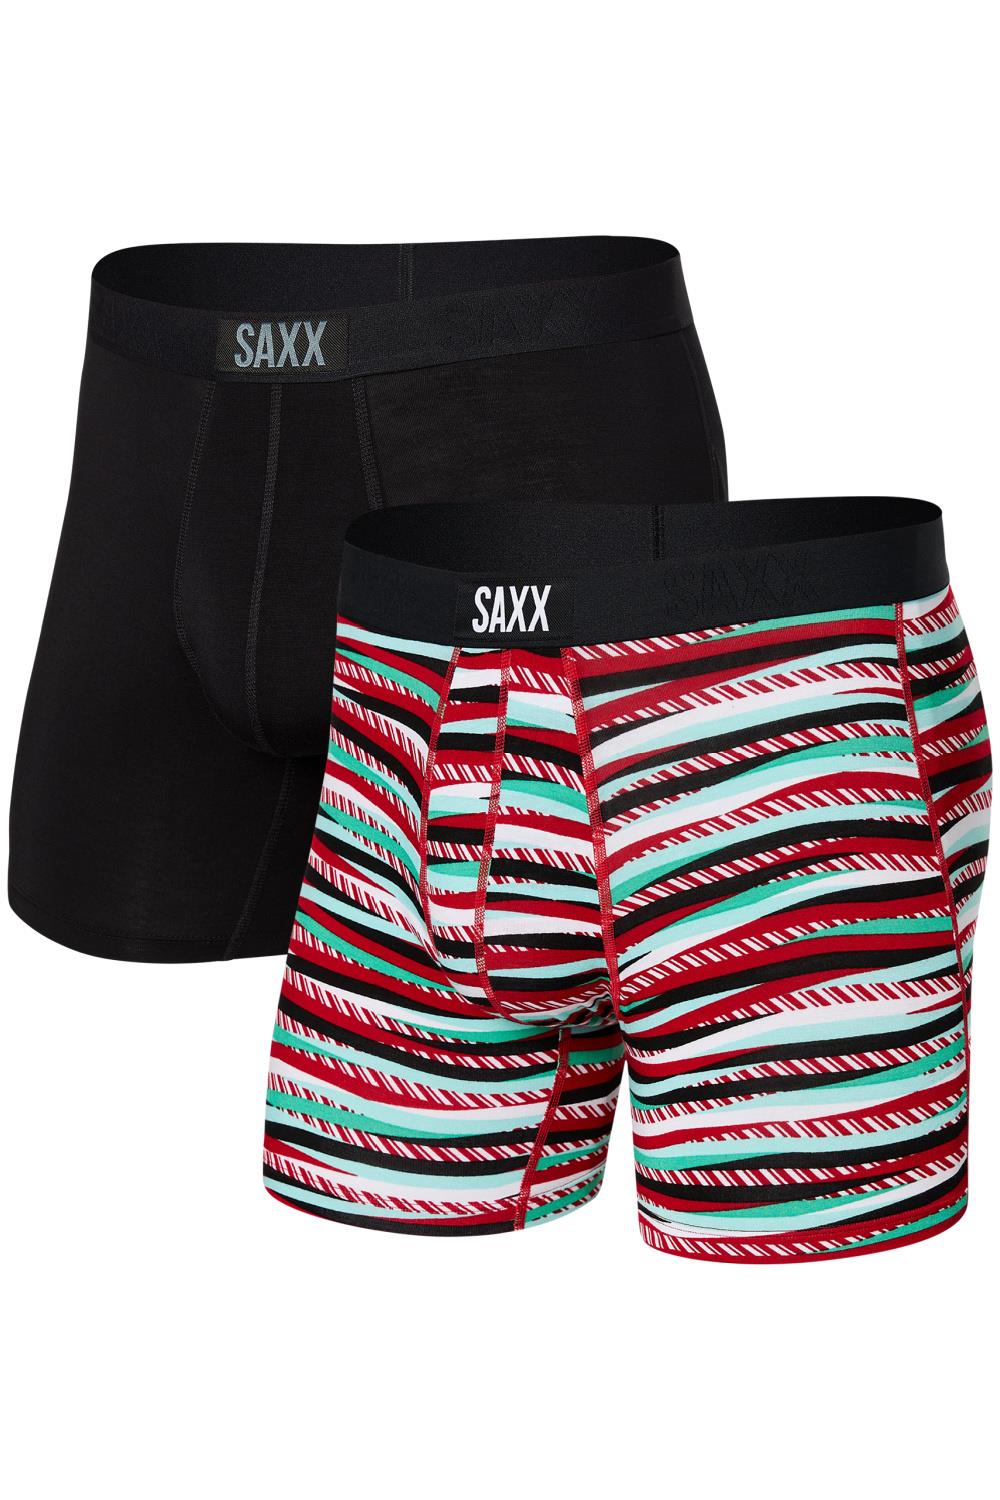 SAXX Vibe Boxer Brief 2 Pack SXPP2V-TWL – My Top Drawer